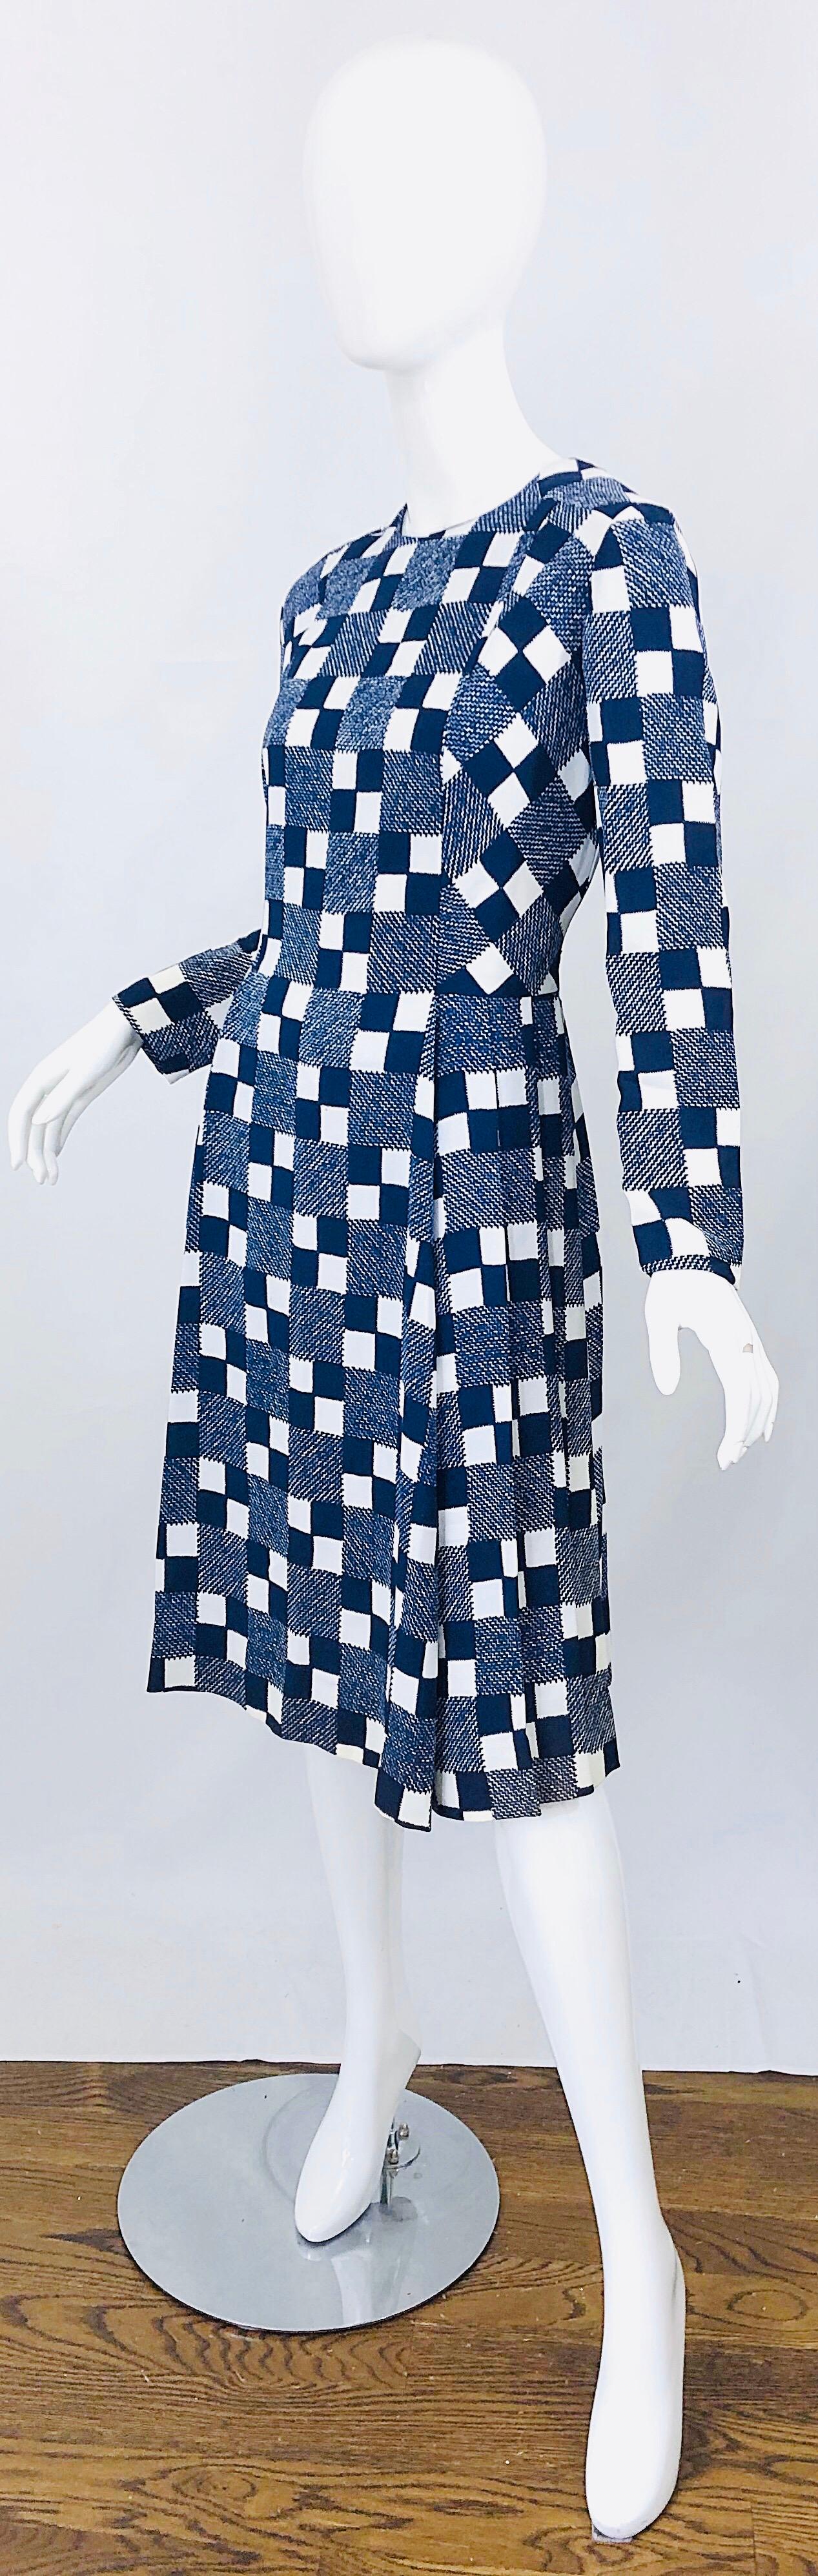 Women's 1960s Baron Peters Navy Blue + White Checkered Rayon Crepe Vintage 60s Dress For Sale